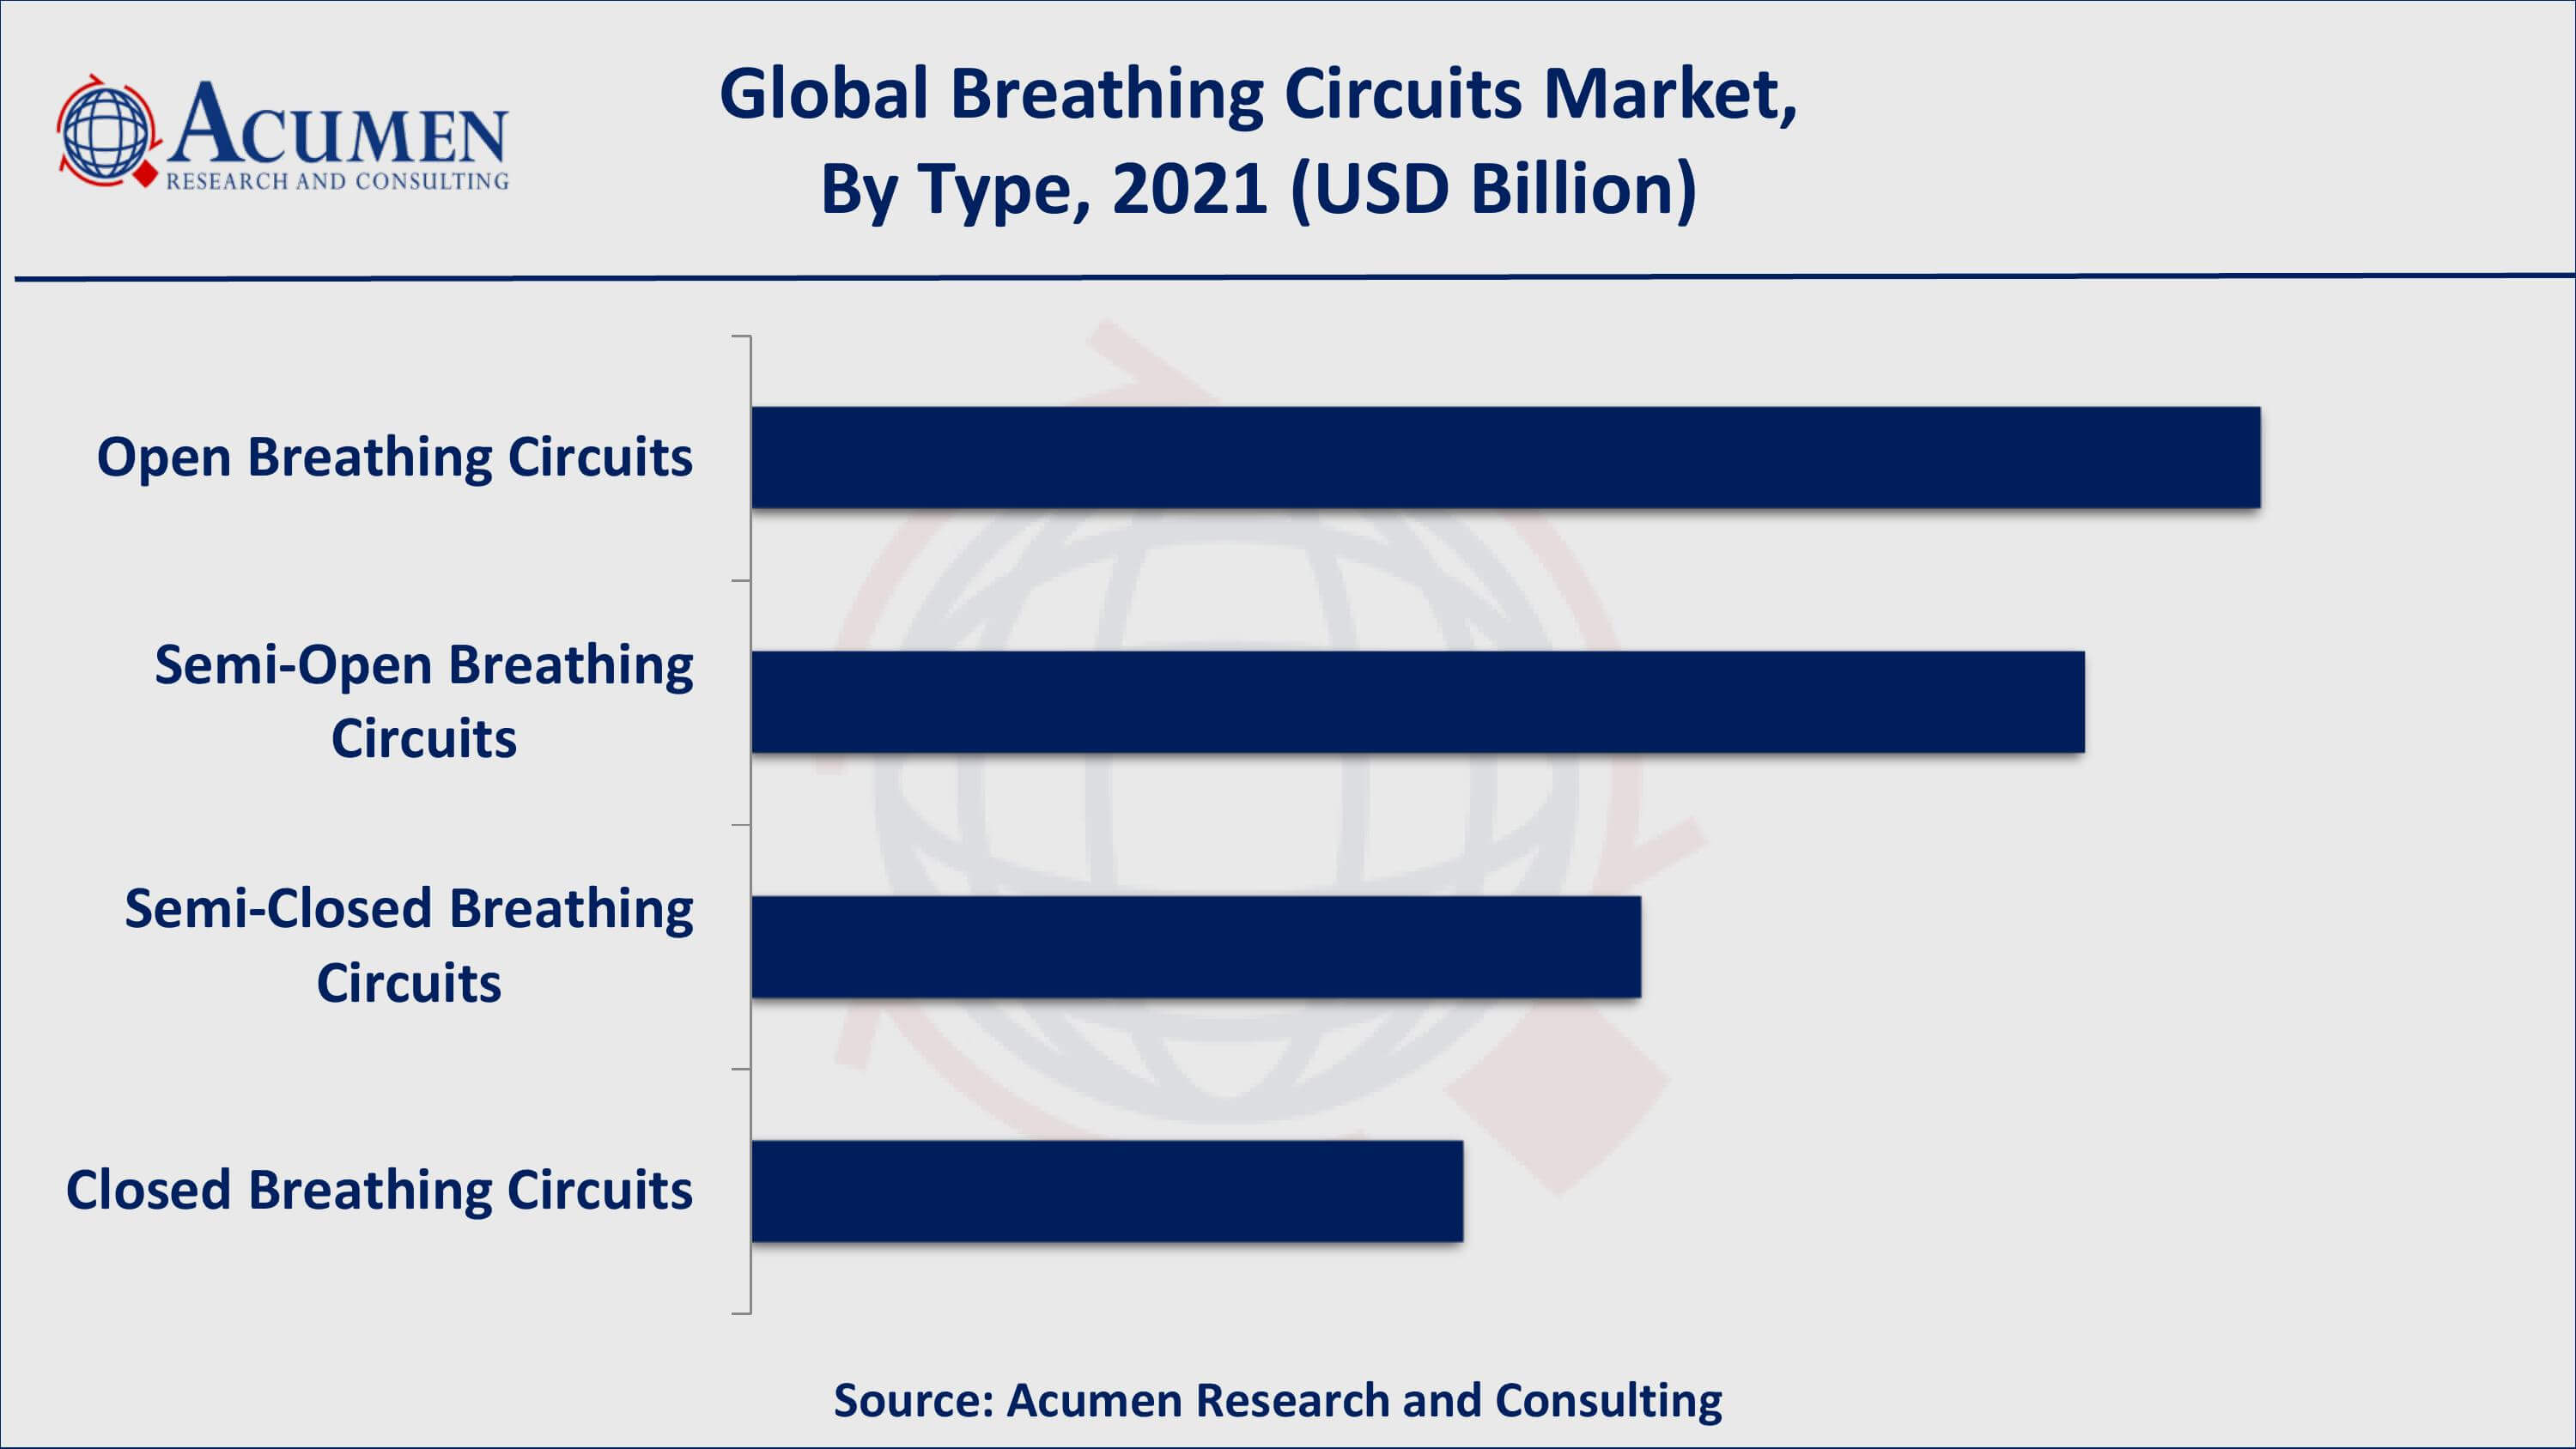 Based on type, open breathing circuits acquired over 35% of the overall market share in 2021